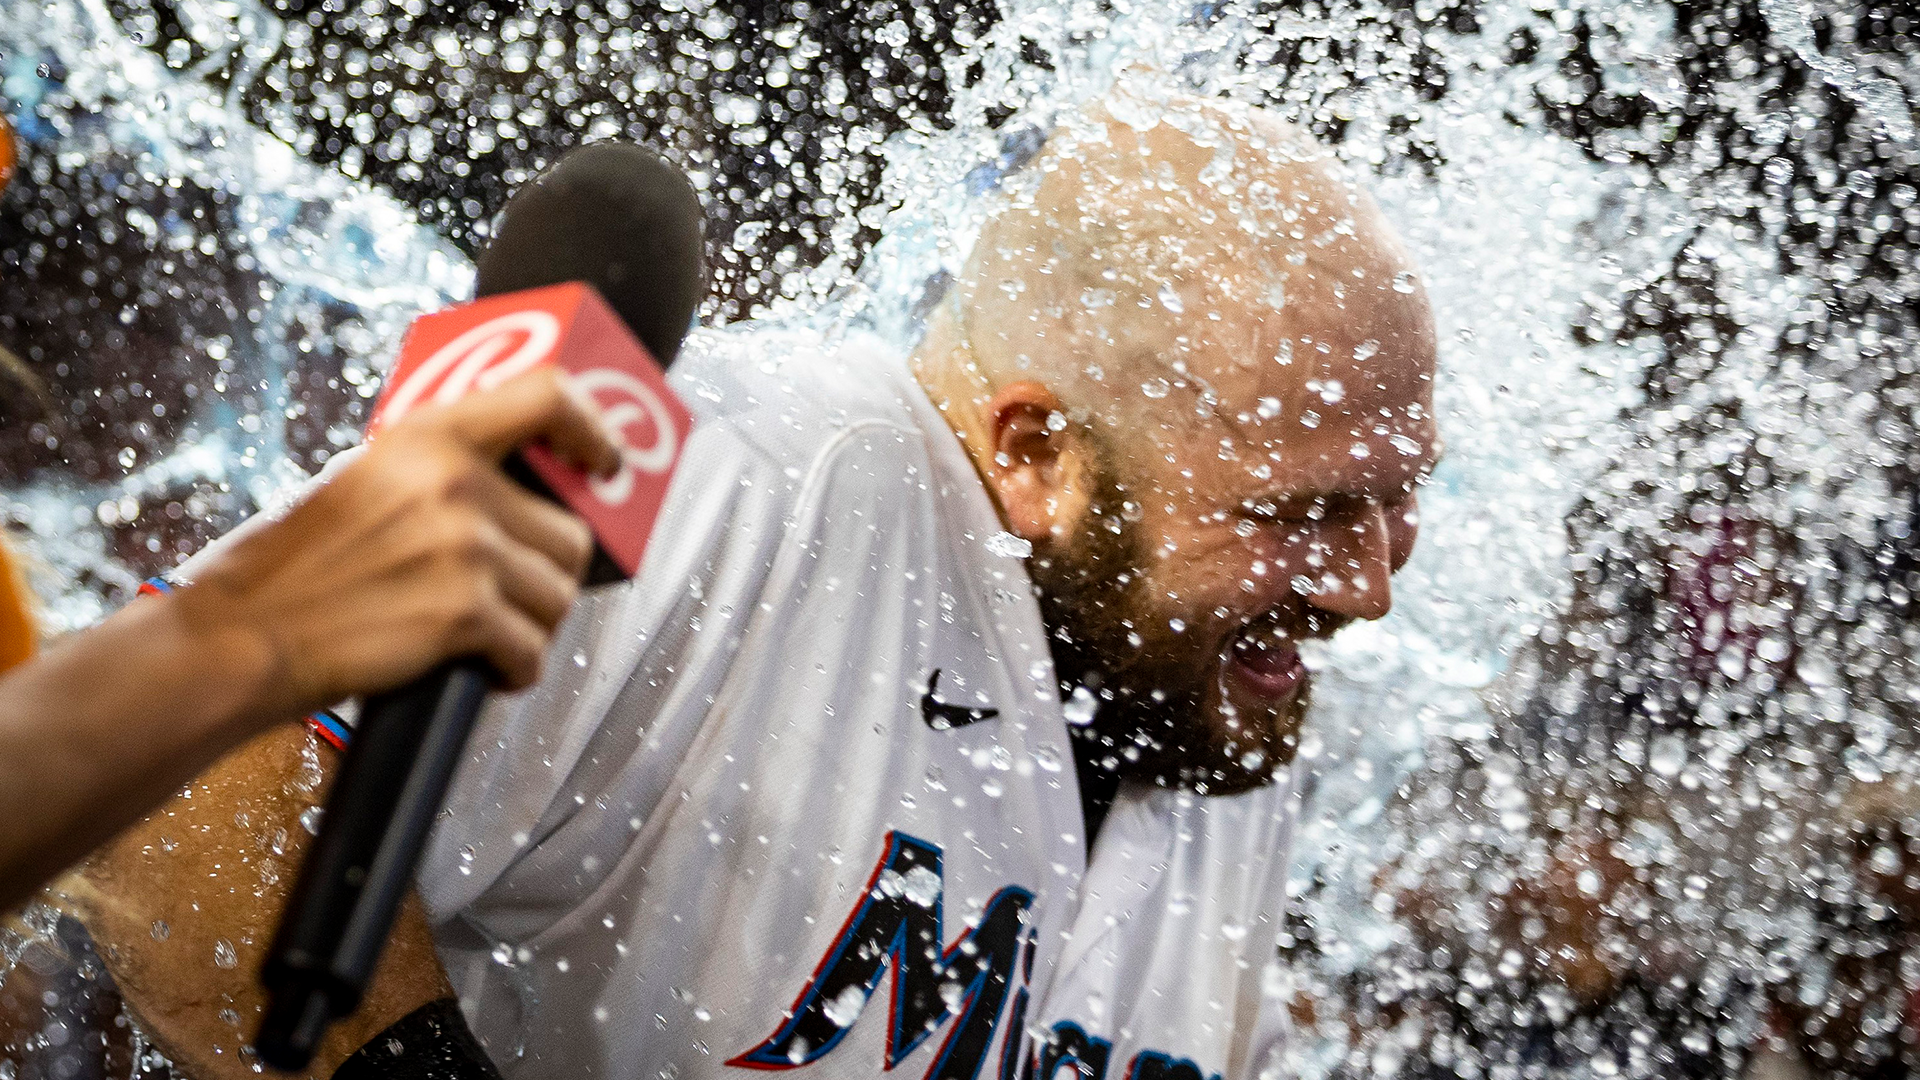 Jake Burger says Marlins' walk-off win was the most fun he's had 'in a  really long time